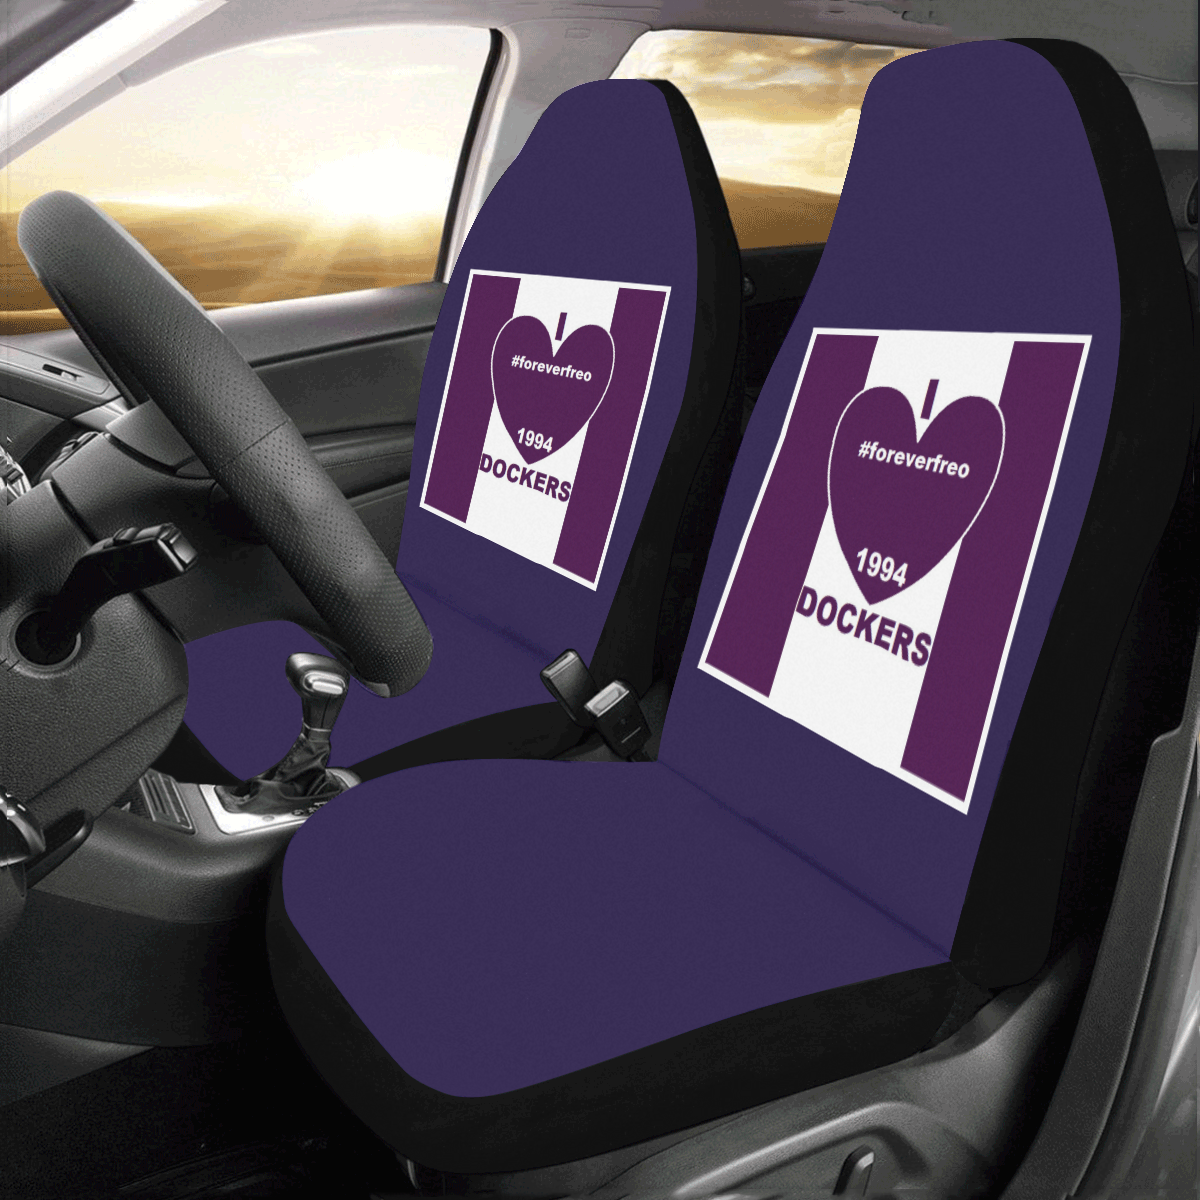 DOCKERS Car Seat Covers (Set of 2)